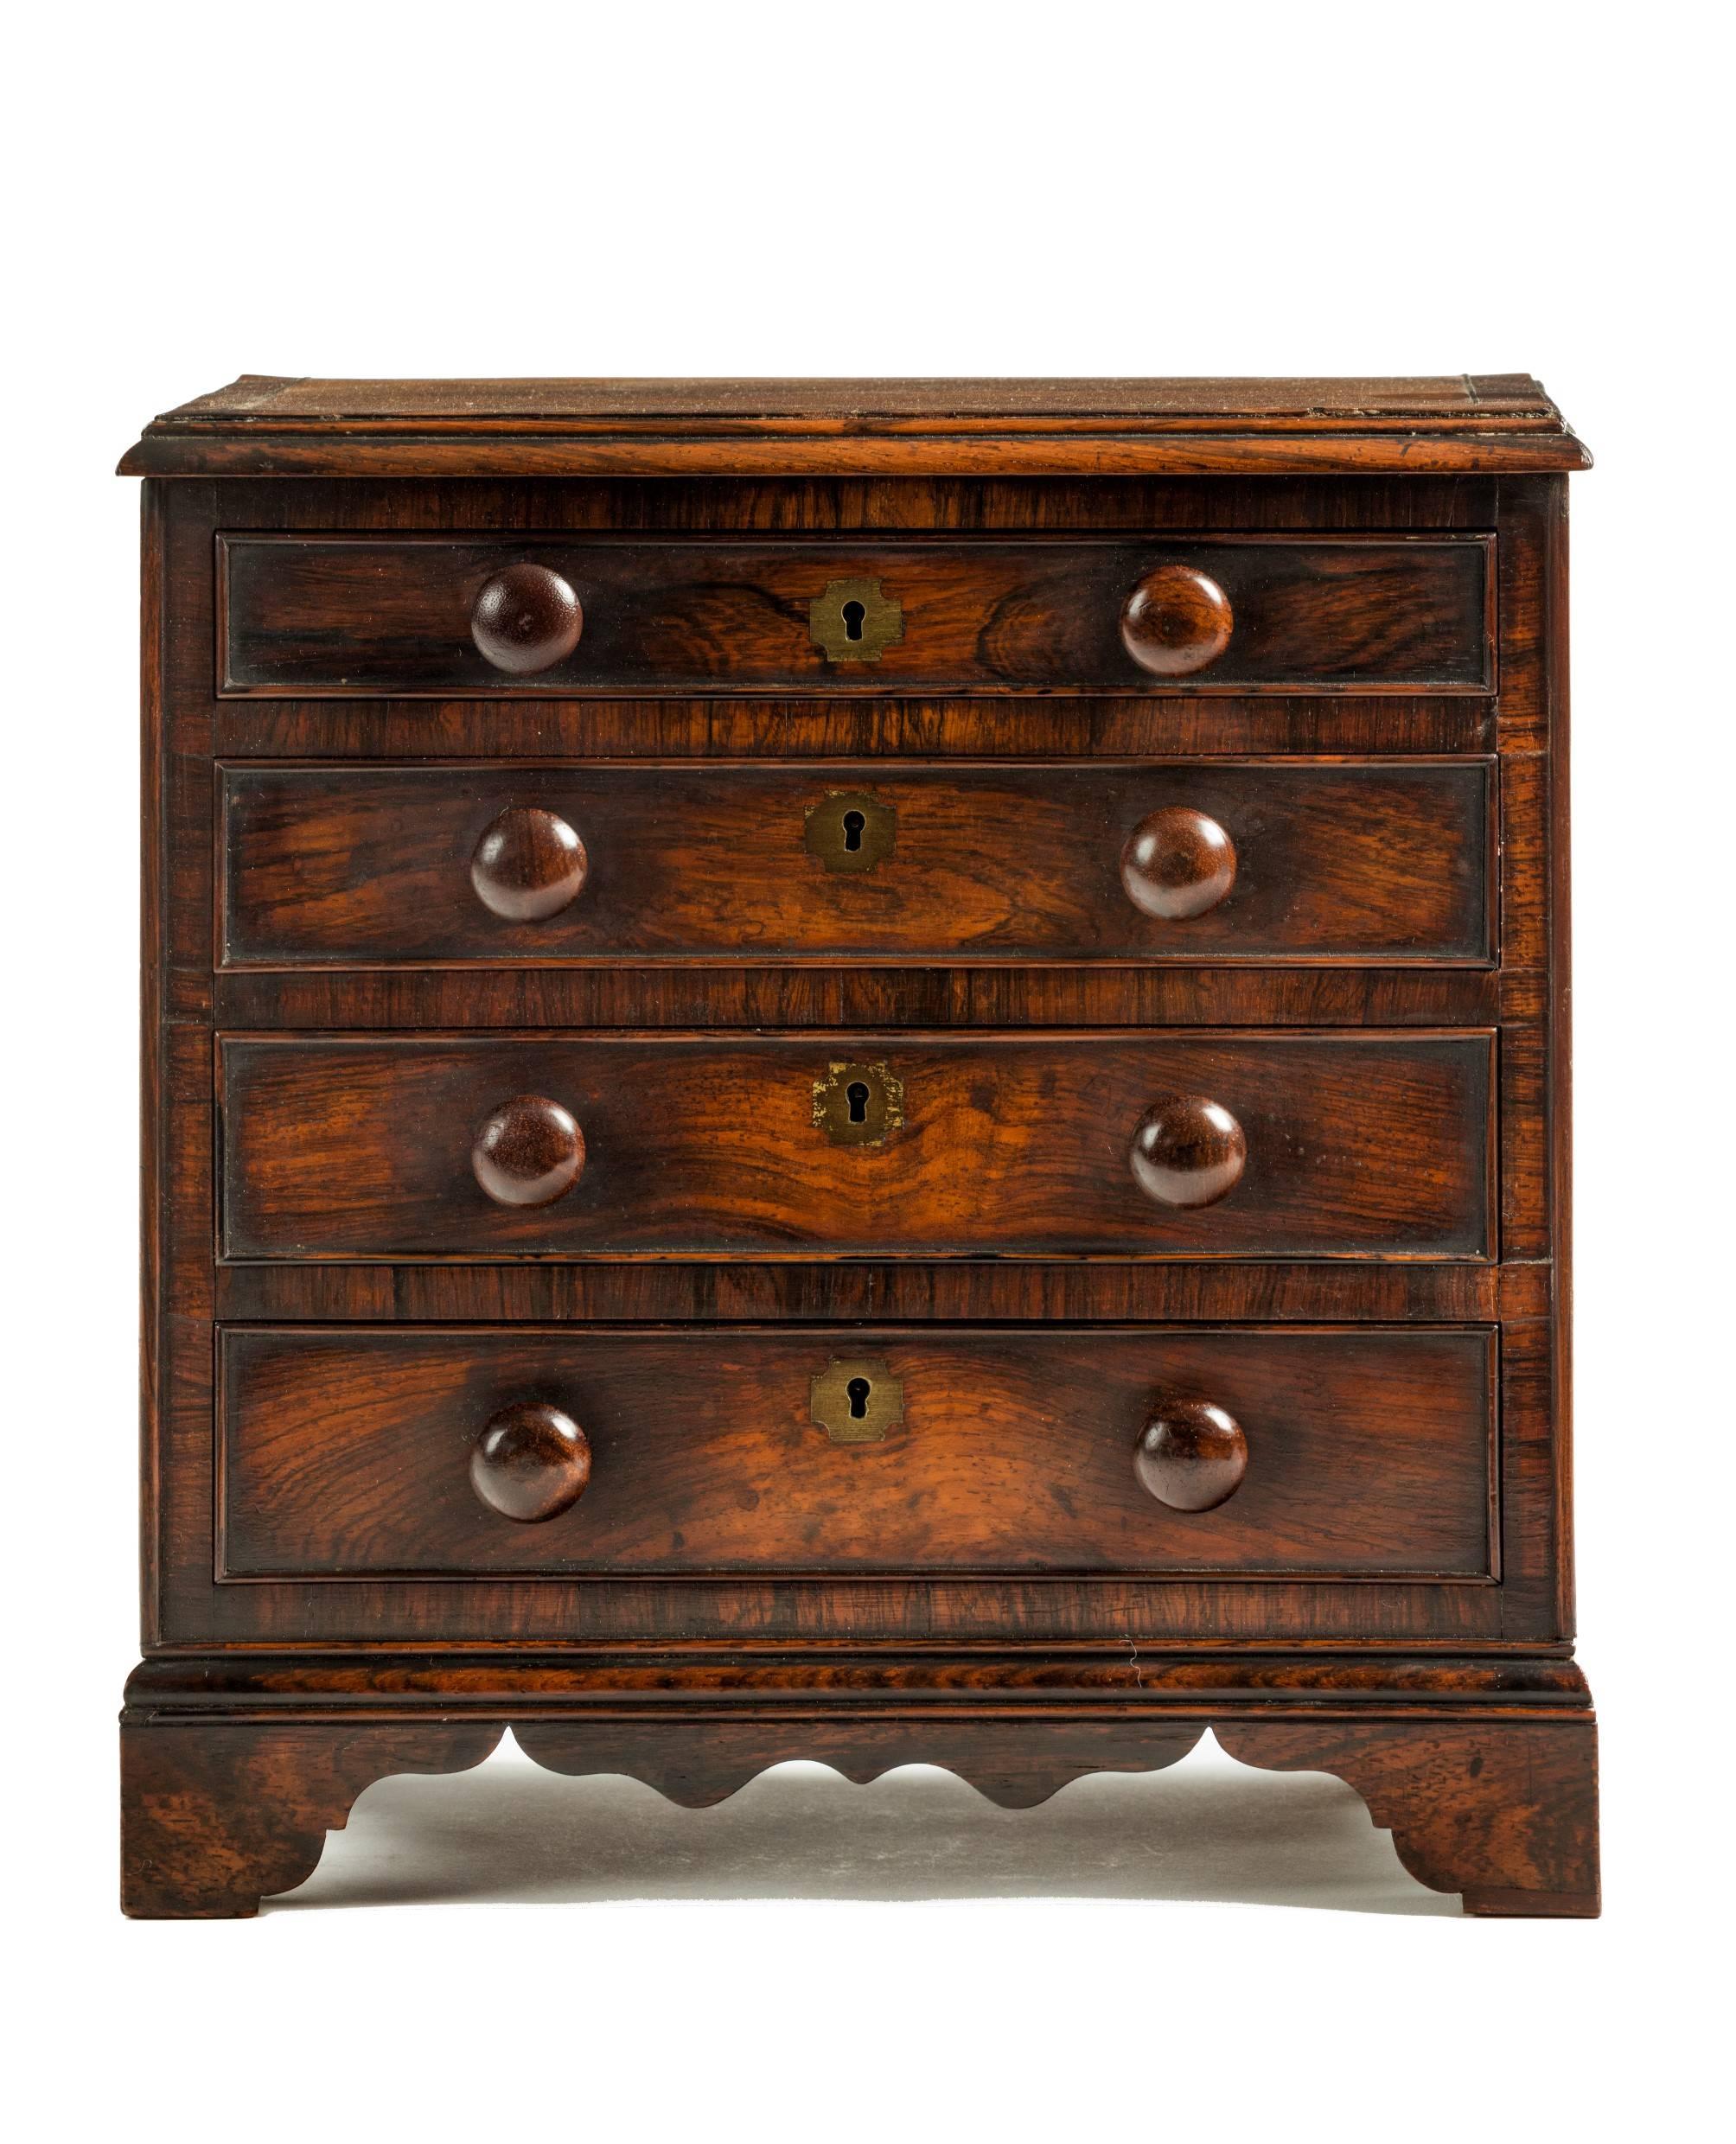 A fine example of a miniature chest of drawers. An apprentice piece or tradesman's sample. Veneered in rosewood with brass inlay. Four long graduated drawers, original locks, handles and bracket feet. The whole is free-standing with veneered sides